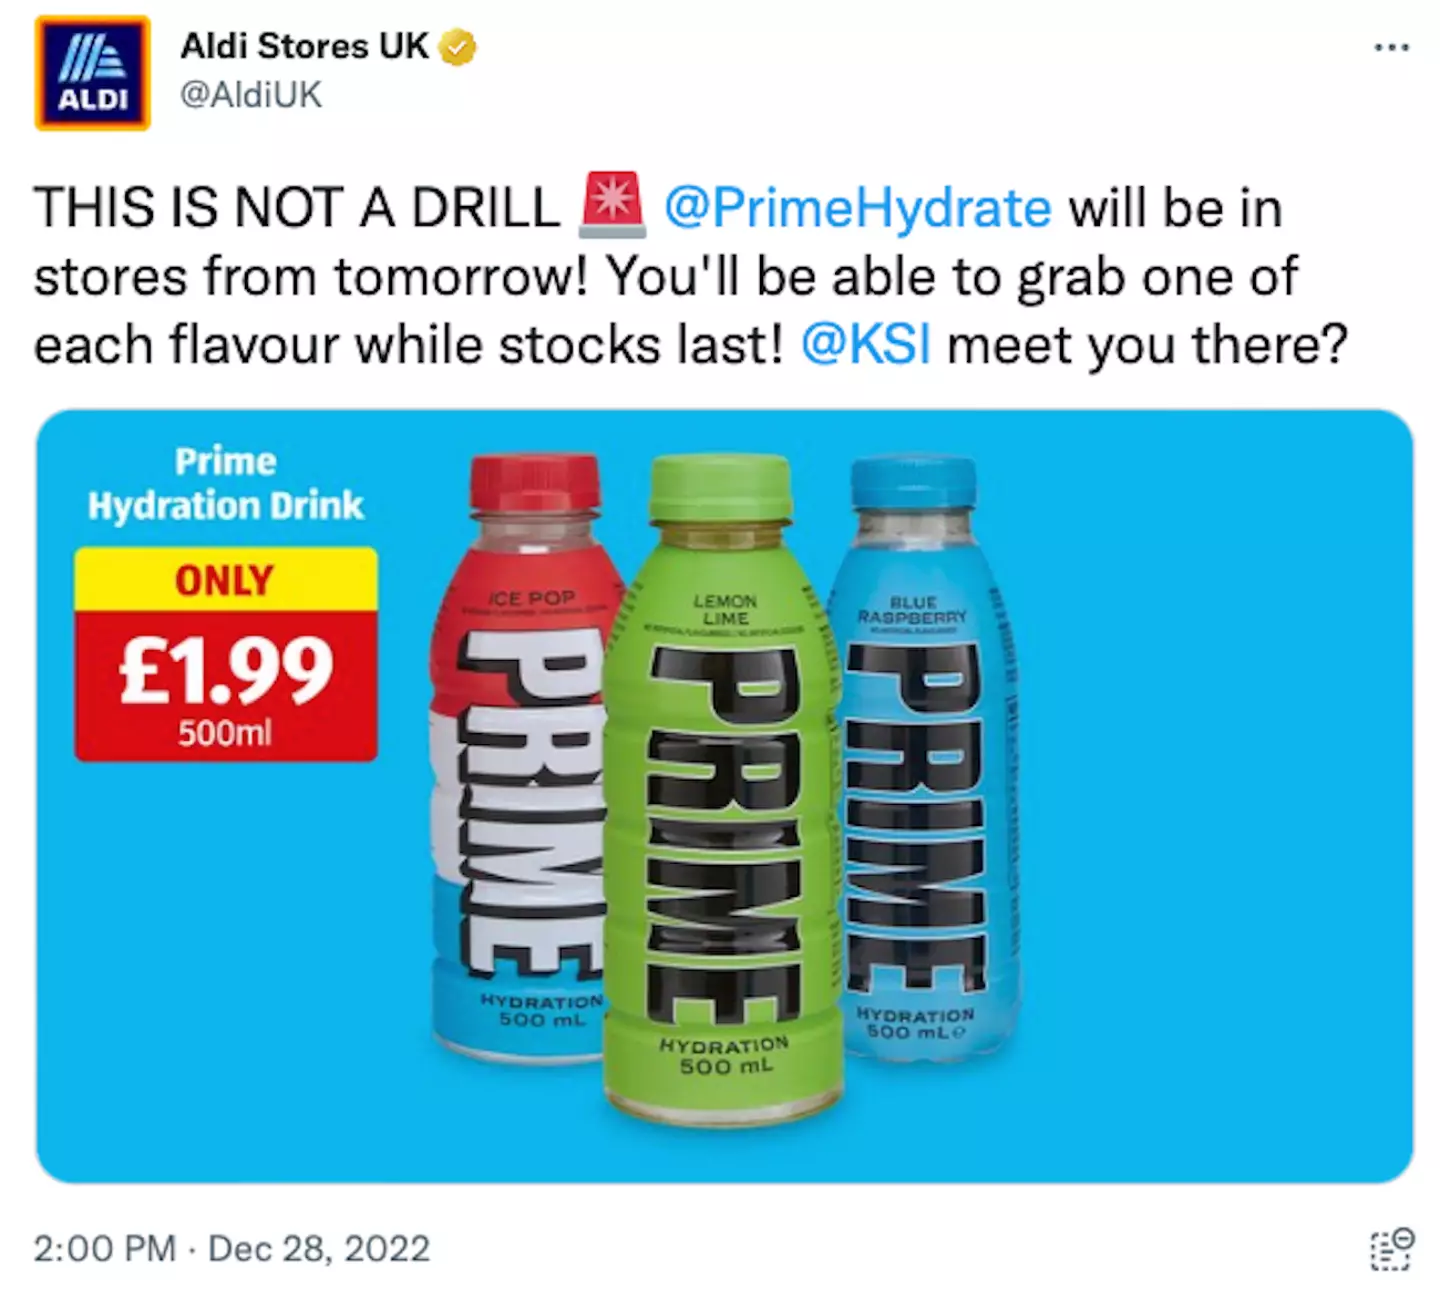 Chaos has ensued since Aldi made the Prime energy drink available in its stores.